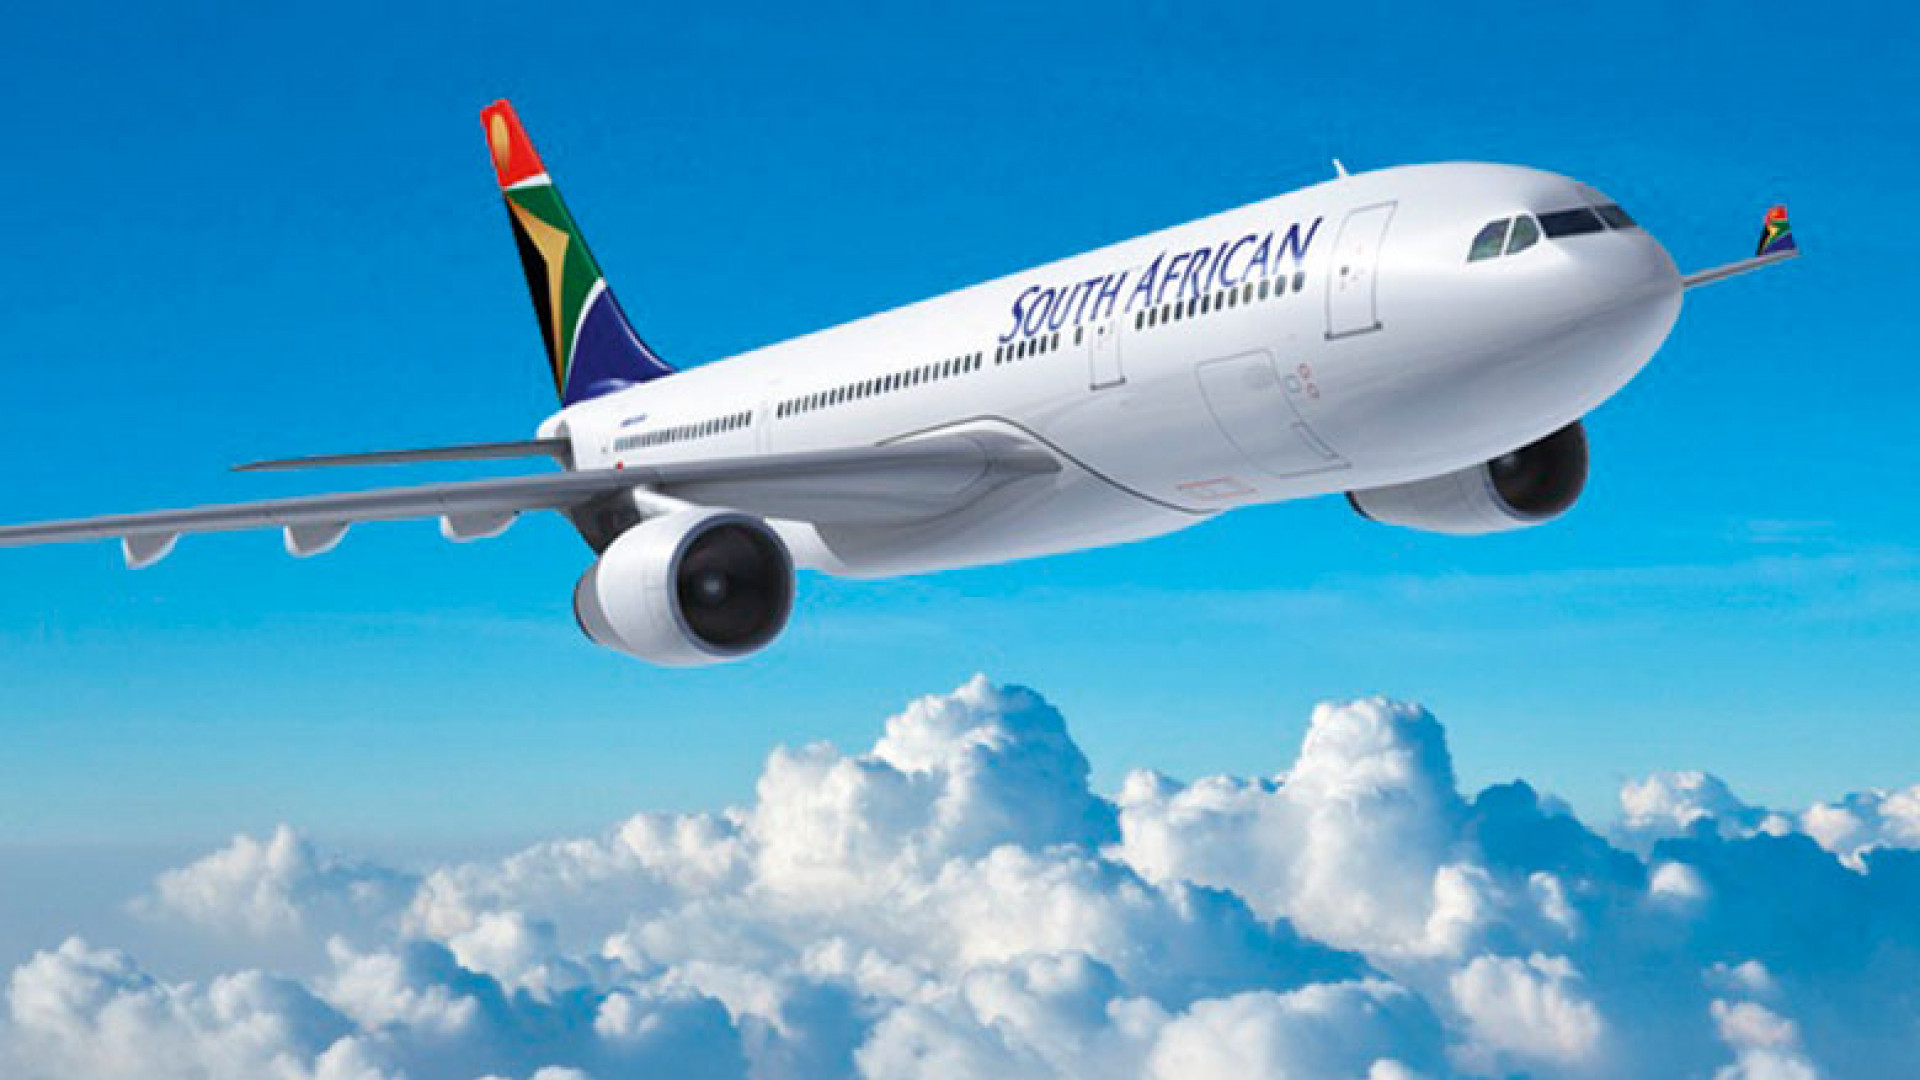 Win two flights to South Africa flying with South African Airways